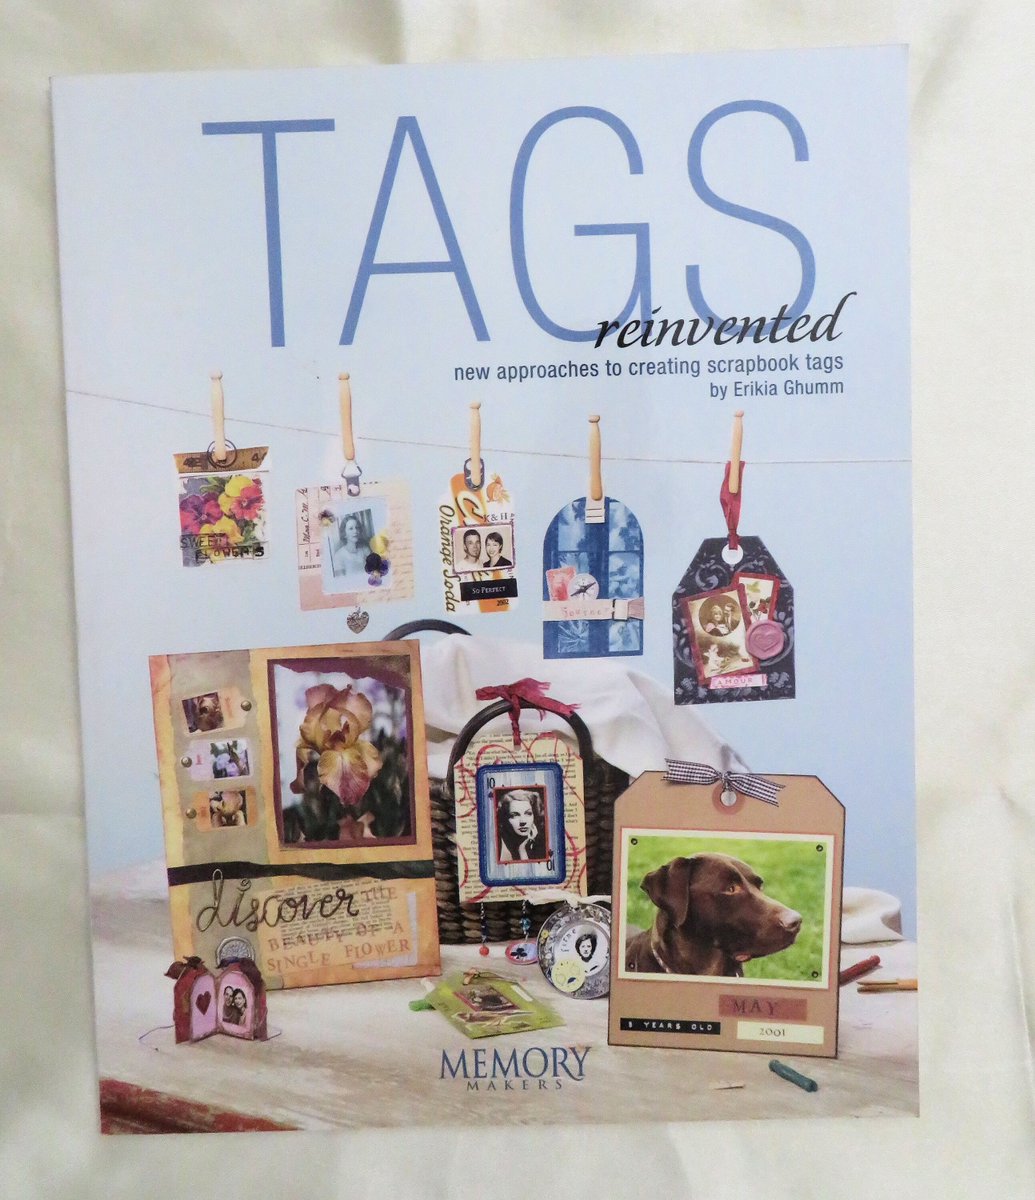 TAGS reinvented - new approaches to creating scrapbook tags by Erikia Ghumm - From MEMORY Makers - Vintage Craft Book - Destash tuppu.net/9d5bf616 #VintageKMMSDelights #Etsy #TagIdeas